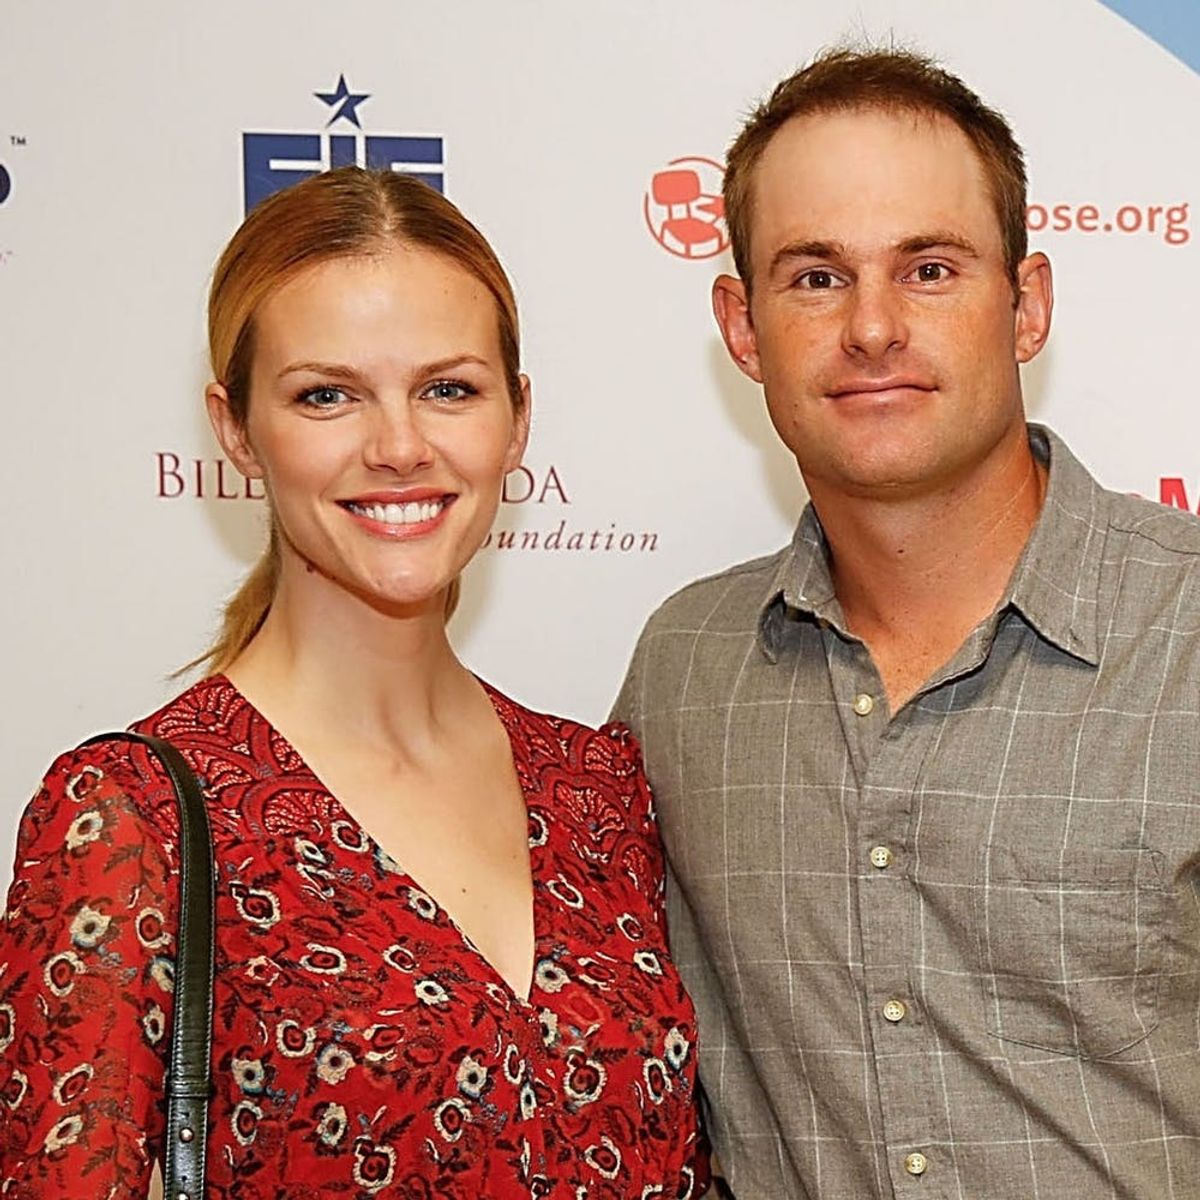 Andy Roddick Just Announced That He and Brooklyn Decker Are Expecting at the Most Unexpected Place